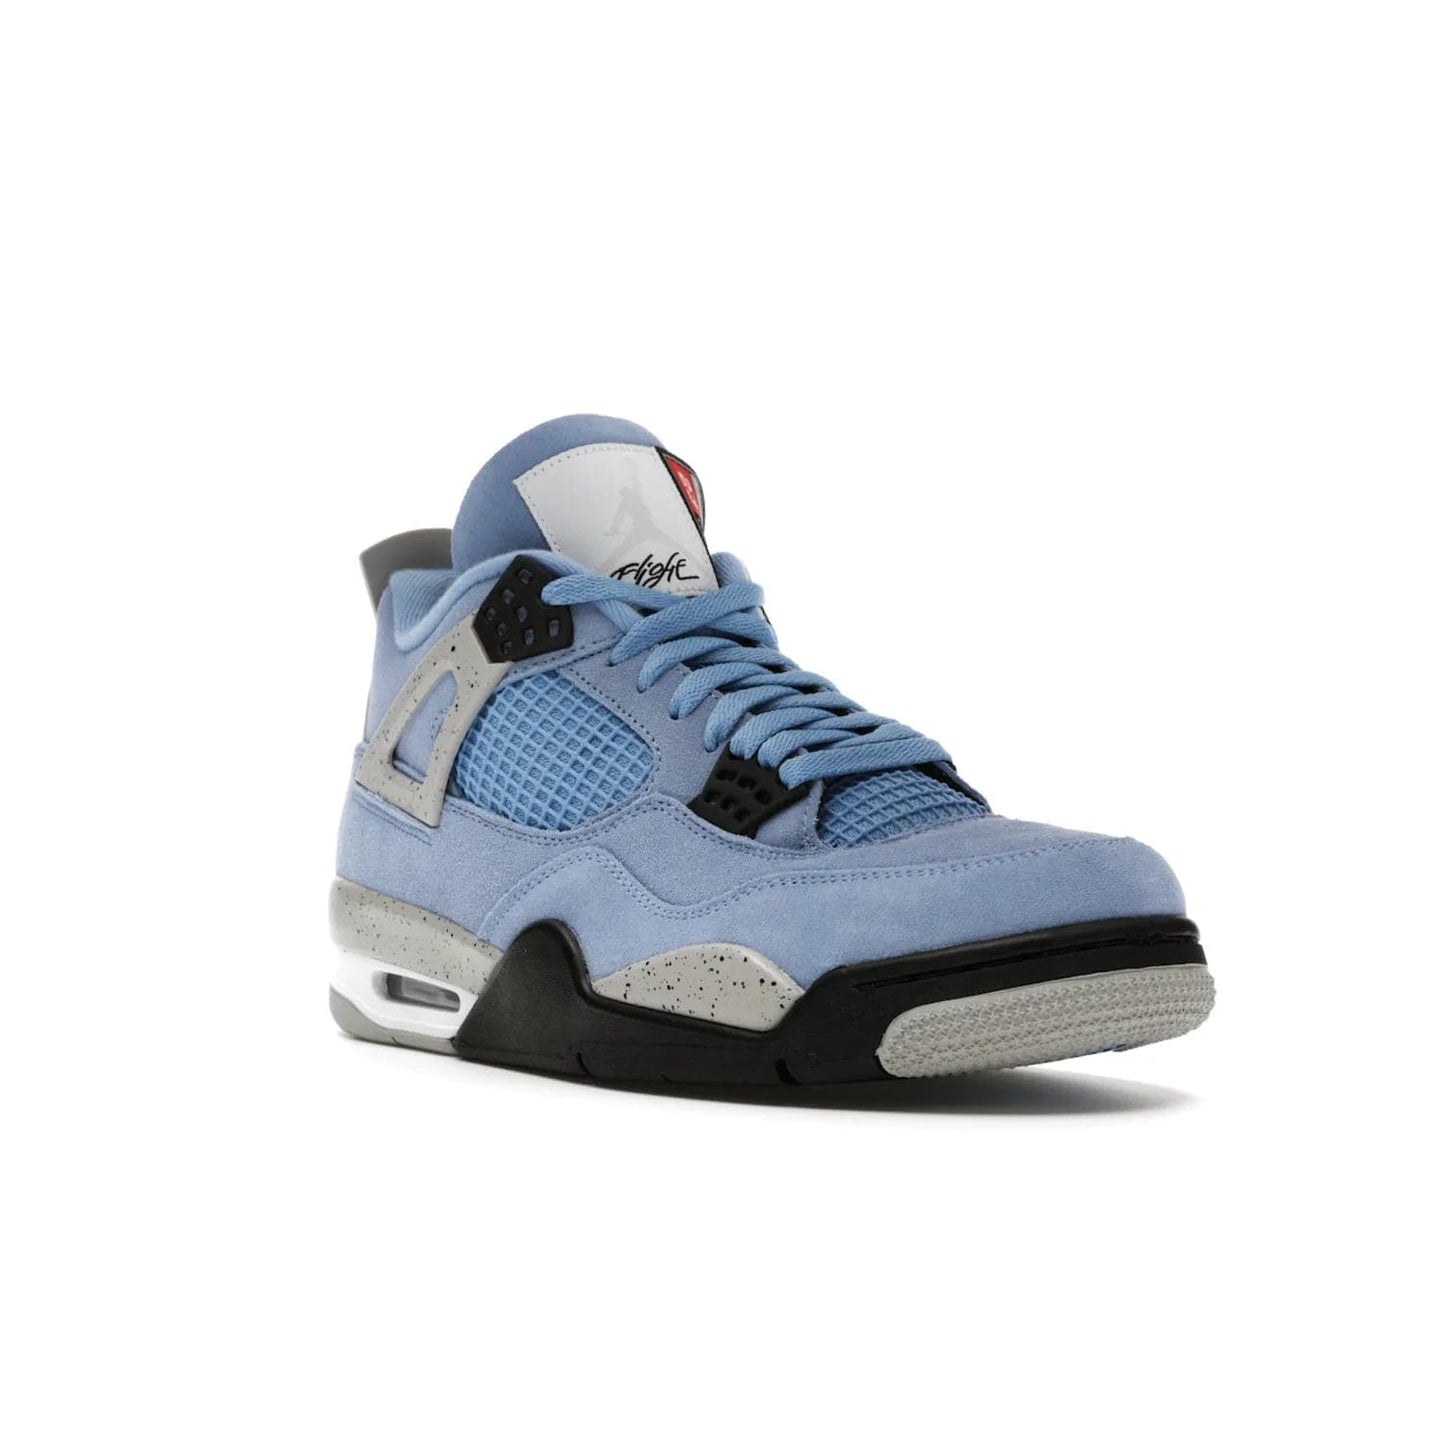 Jordan 4 Retro University Blue - Image 6 - Only at www.BallersClubKickz.com - The Air Jordan 4 University Blue honors MJ's alma mater. Rich University Blue suede, panels of netting, and Cement Grey speckled eyelets give this design an edgy look. Features a black, white and Tech Grey sole with a clear Air unit and two woven labels on the tongue. Jumpman logo & Team Jordan jock tag included. Released April 2021.